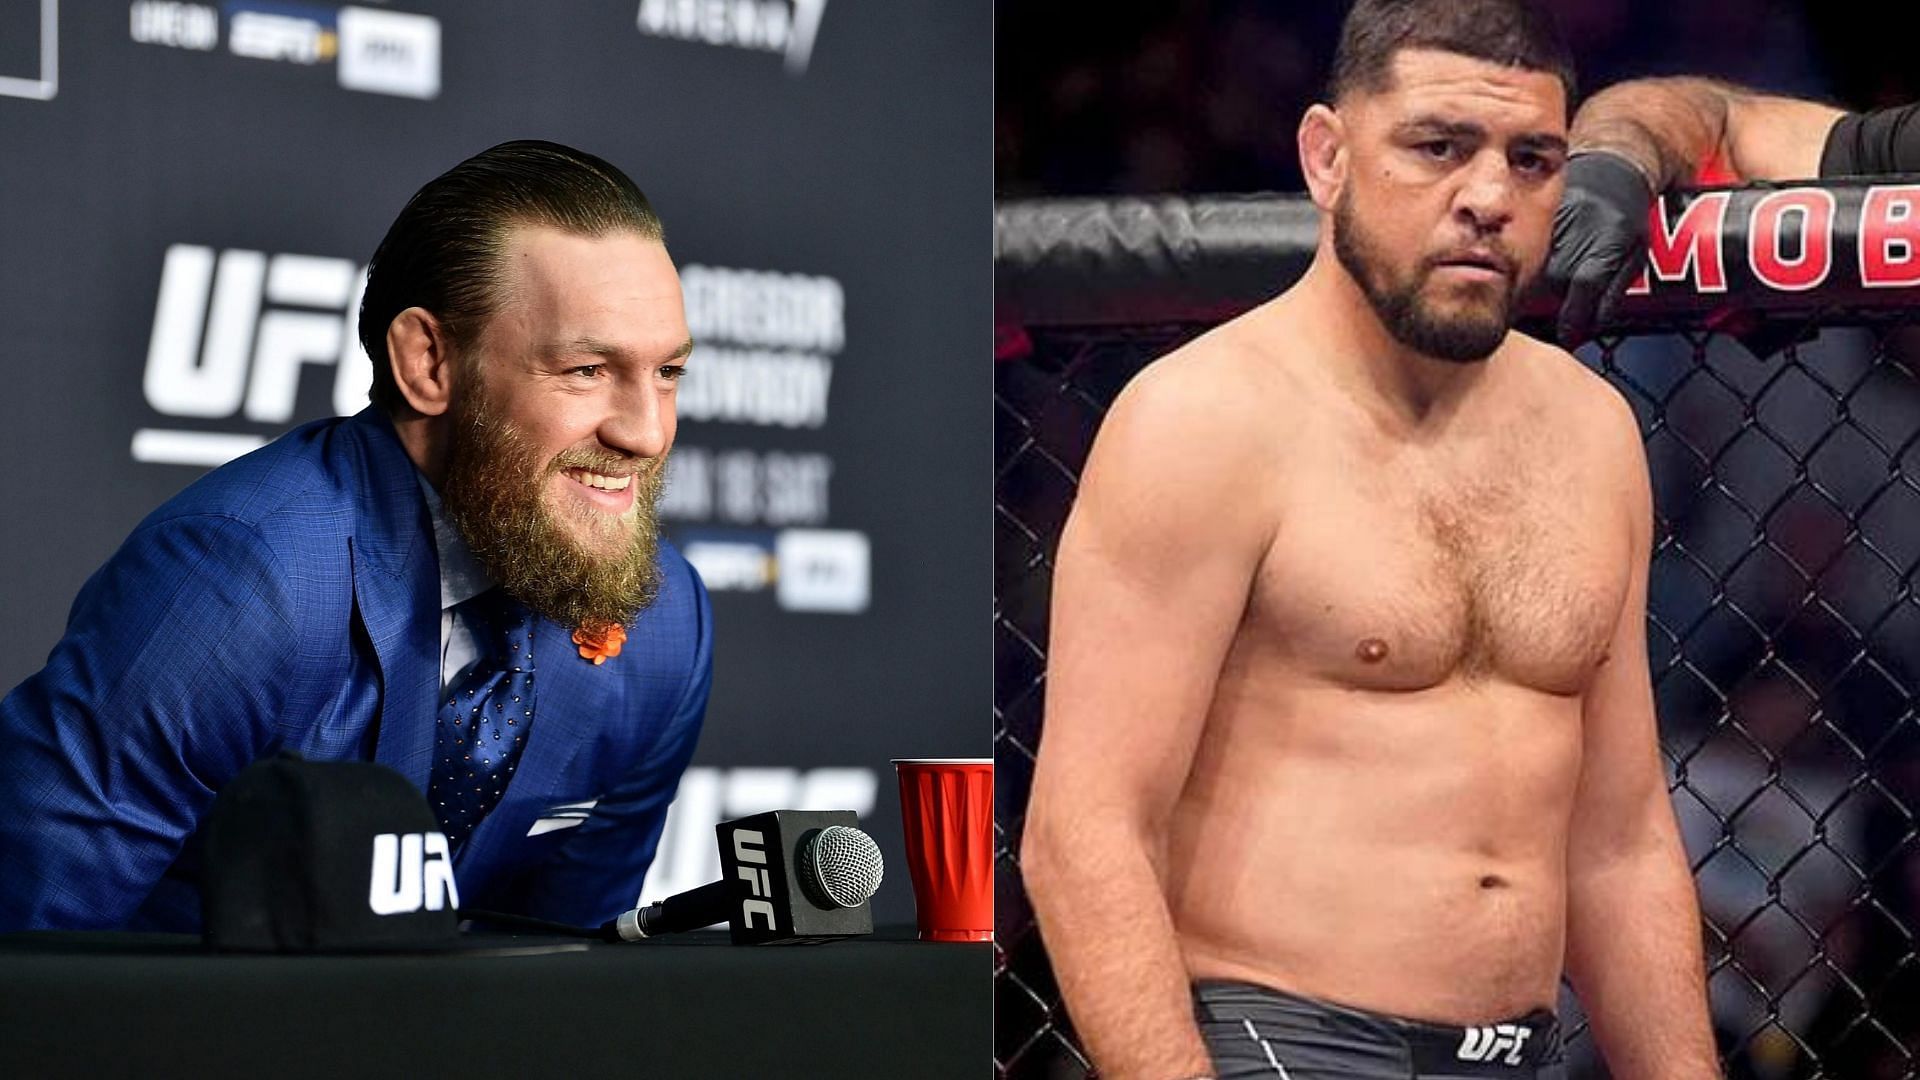 McGregor (L) was full of praises for Nick Diaz (R) after his visit to Mexico